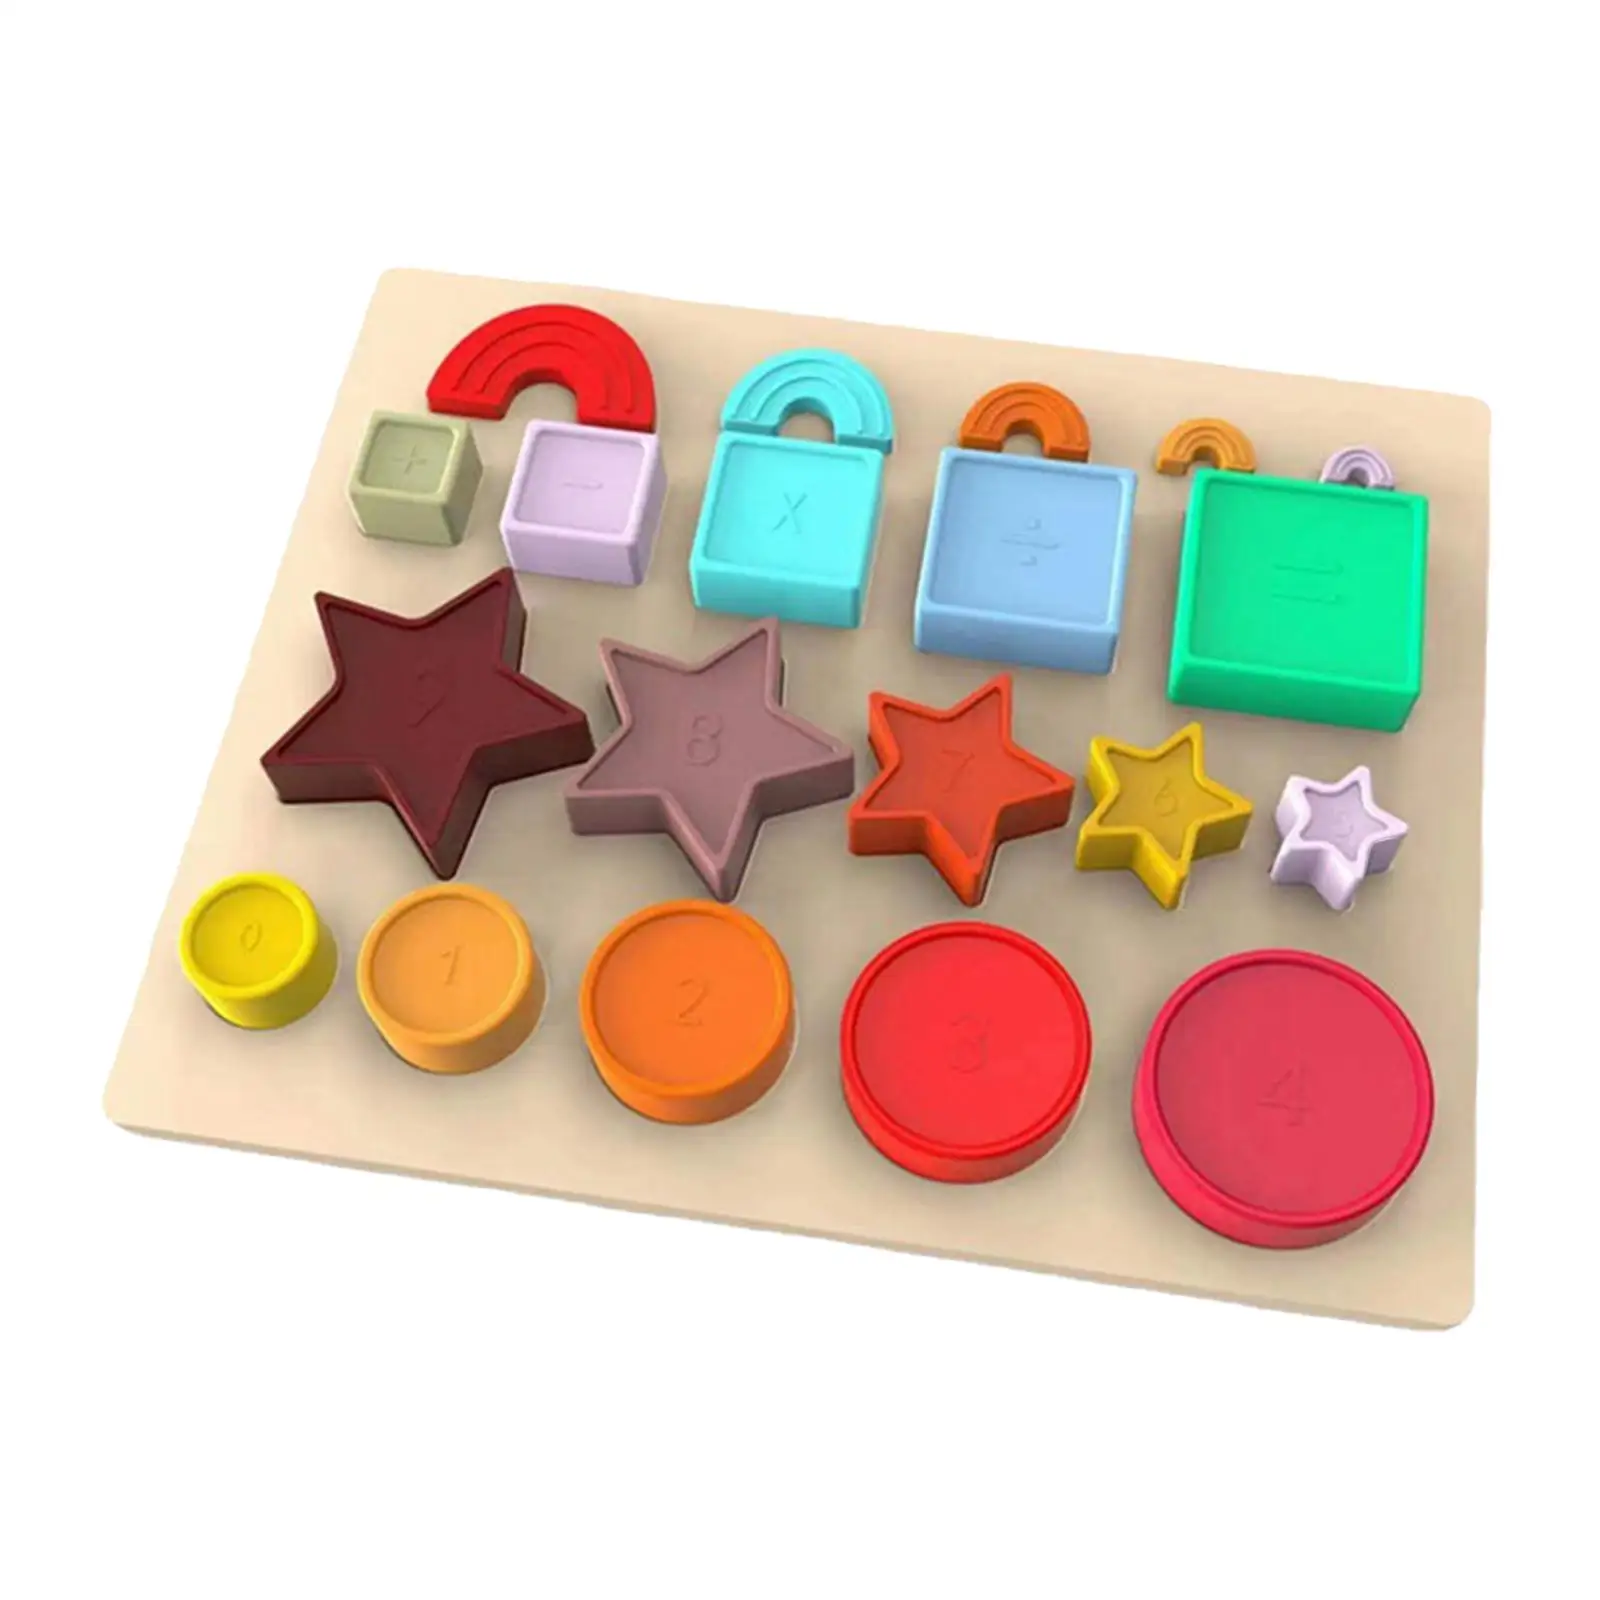 Montessori Puzzle Shape Develop Imagination Toddler Shape Puzzles Shape Sorting and Stacking Game for Teaching Props Boys Girls